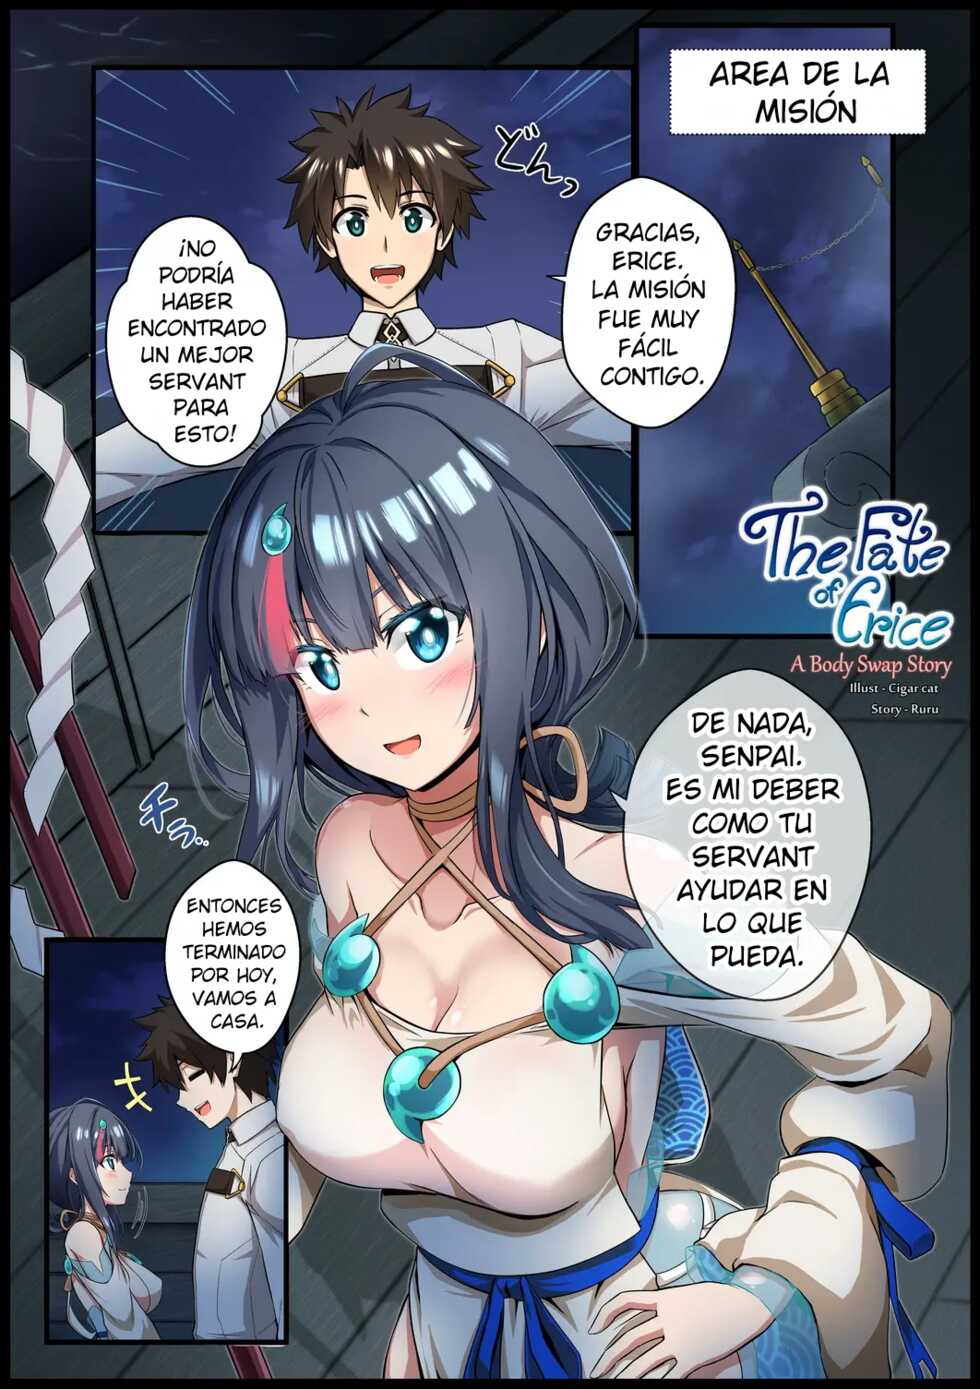 [Cigar cat] The Fate of Erice -A body swap story- (Fate/Grand Order) [Spanish] - Page 2